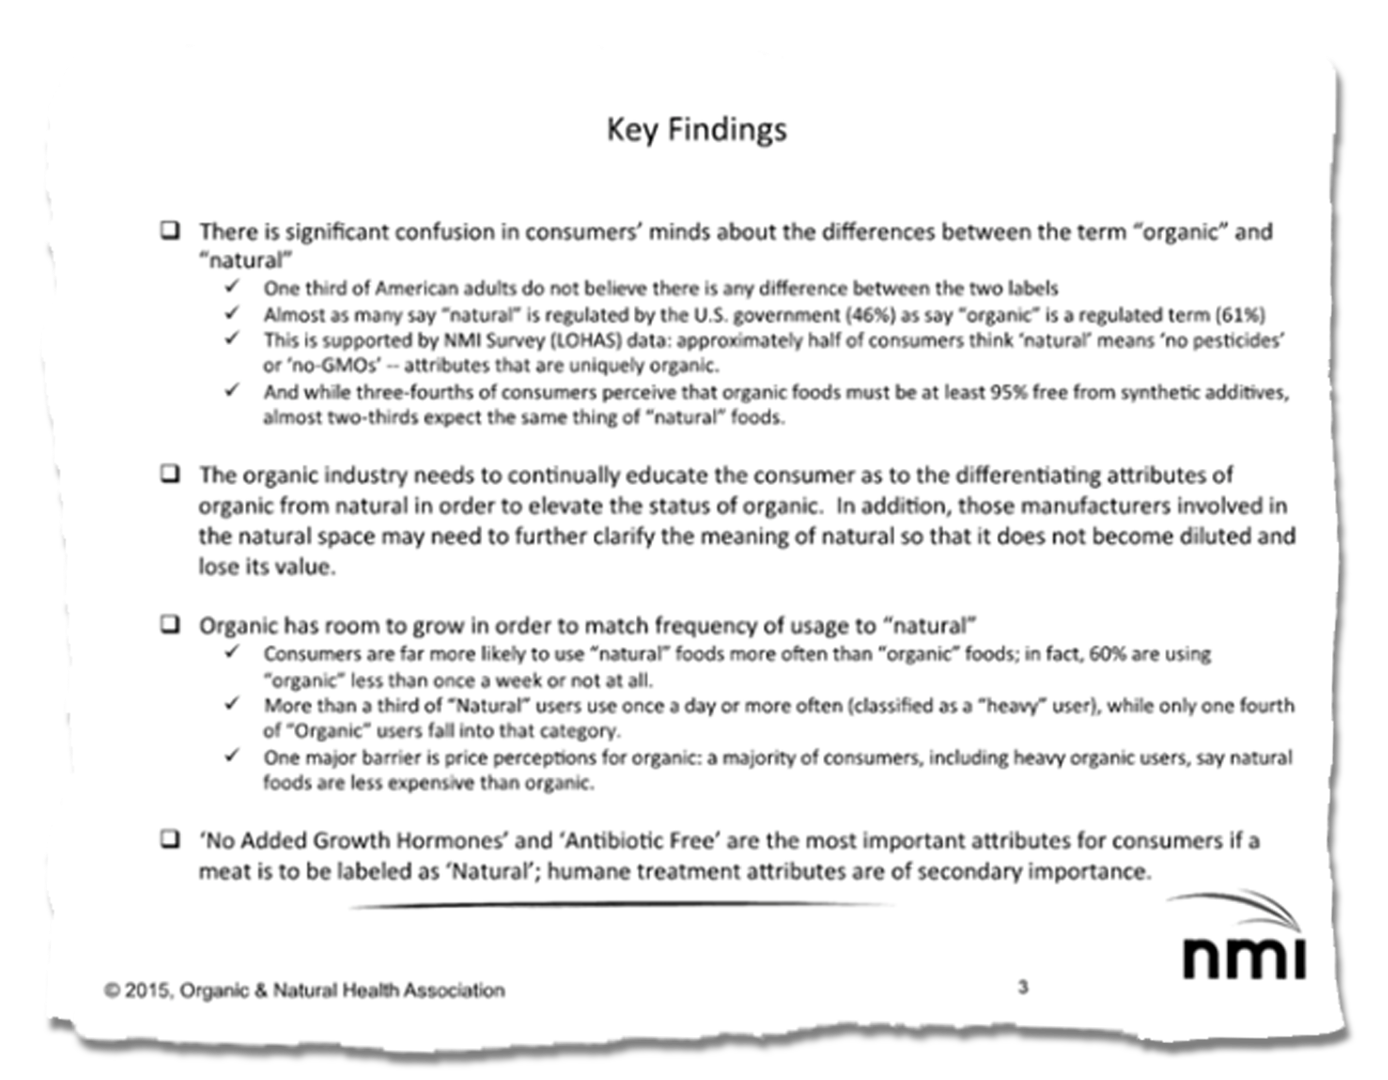 A slide from NMI. The contents are as follows: "Key Findings. There is significant confusion in consumers minds about the differences between the term organic and natural One third of American adults do not believe there is any difference between the two labels Almost as many say natural is regulated by the U.S government 46% as say organic is regulated term 61% This is supported by NMI Survey LOHAS data approximately half of consumers think natural means no pesticides or no-GMOs -- attributes that are uniquely organic And while three-fourths of consumers perceive that organic foods must be at least 95% free from synthetic additives almost two-thirds expect the same thing of natural foods The organic industry needs to continually educate the consumer as to the differentiating attributes of organic from natural in order to elevate the status of organic In addition those manufacturers involved in the natural space may need to further clarify the meaning of natural so that it does not become diluted and lose its value Organic has room to grow in order to match frequency of usage to natural Consumers are far more likely to use natural foods more often than organic foods in fact 60% are using organic less than once week or not at all More than third of Natural users use once day or more often classified as heavy user while only one fourth of Organic users fall into that category One major barrier is price perceptions for organic majority of consumers including heavy organic users say natural foods are less expensive than organic No Added Growth Hormones and Antibiotic Free are the most important attributes for consumers if meat is to be labeled as Natural humane treatment attributes are of secondary importance ."